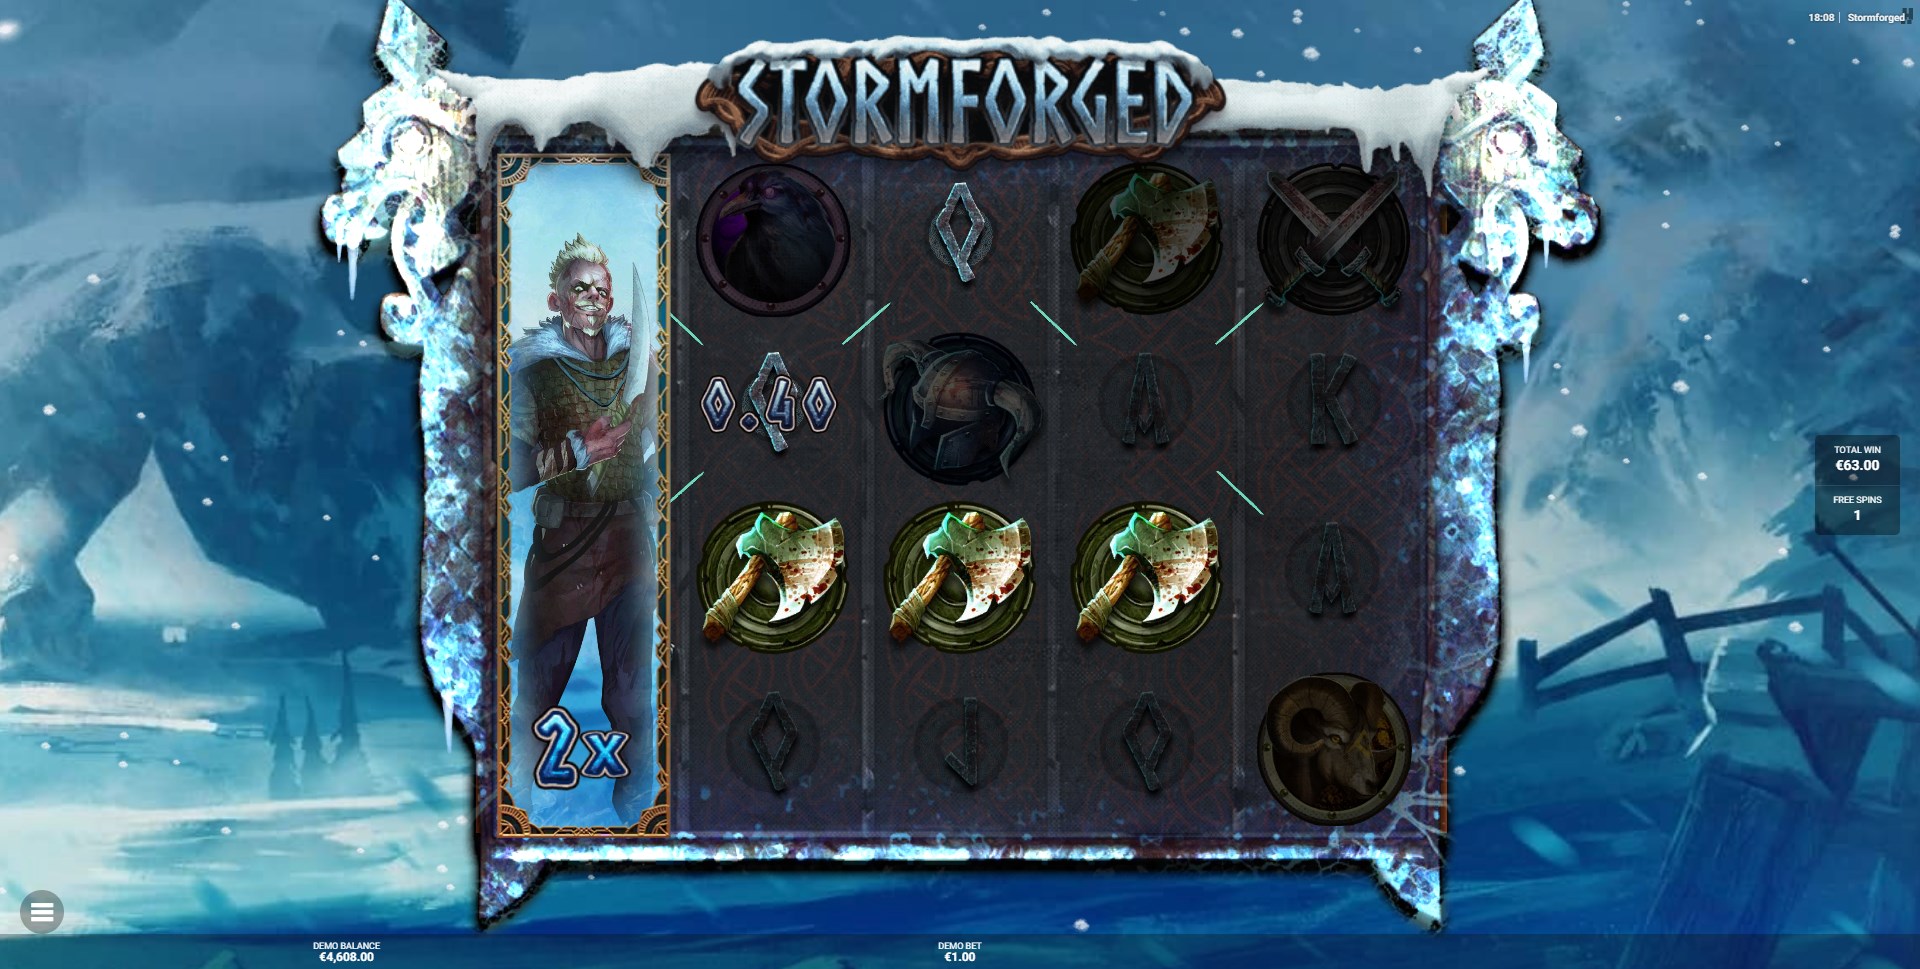 Stormforged Slot - Warriors of the Storm Feature